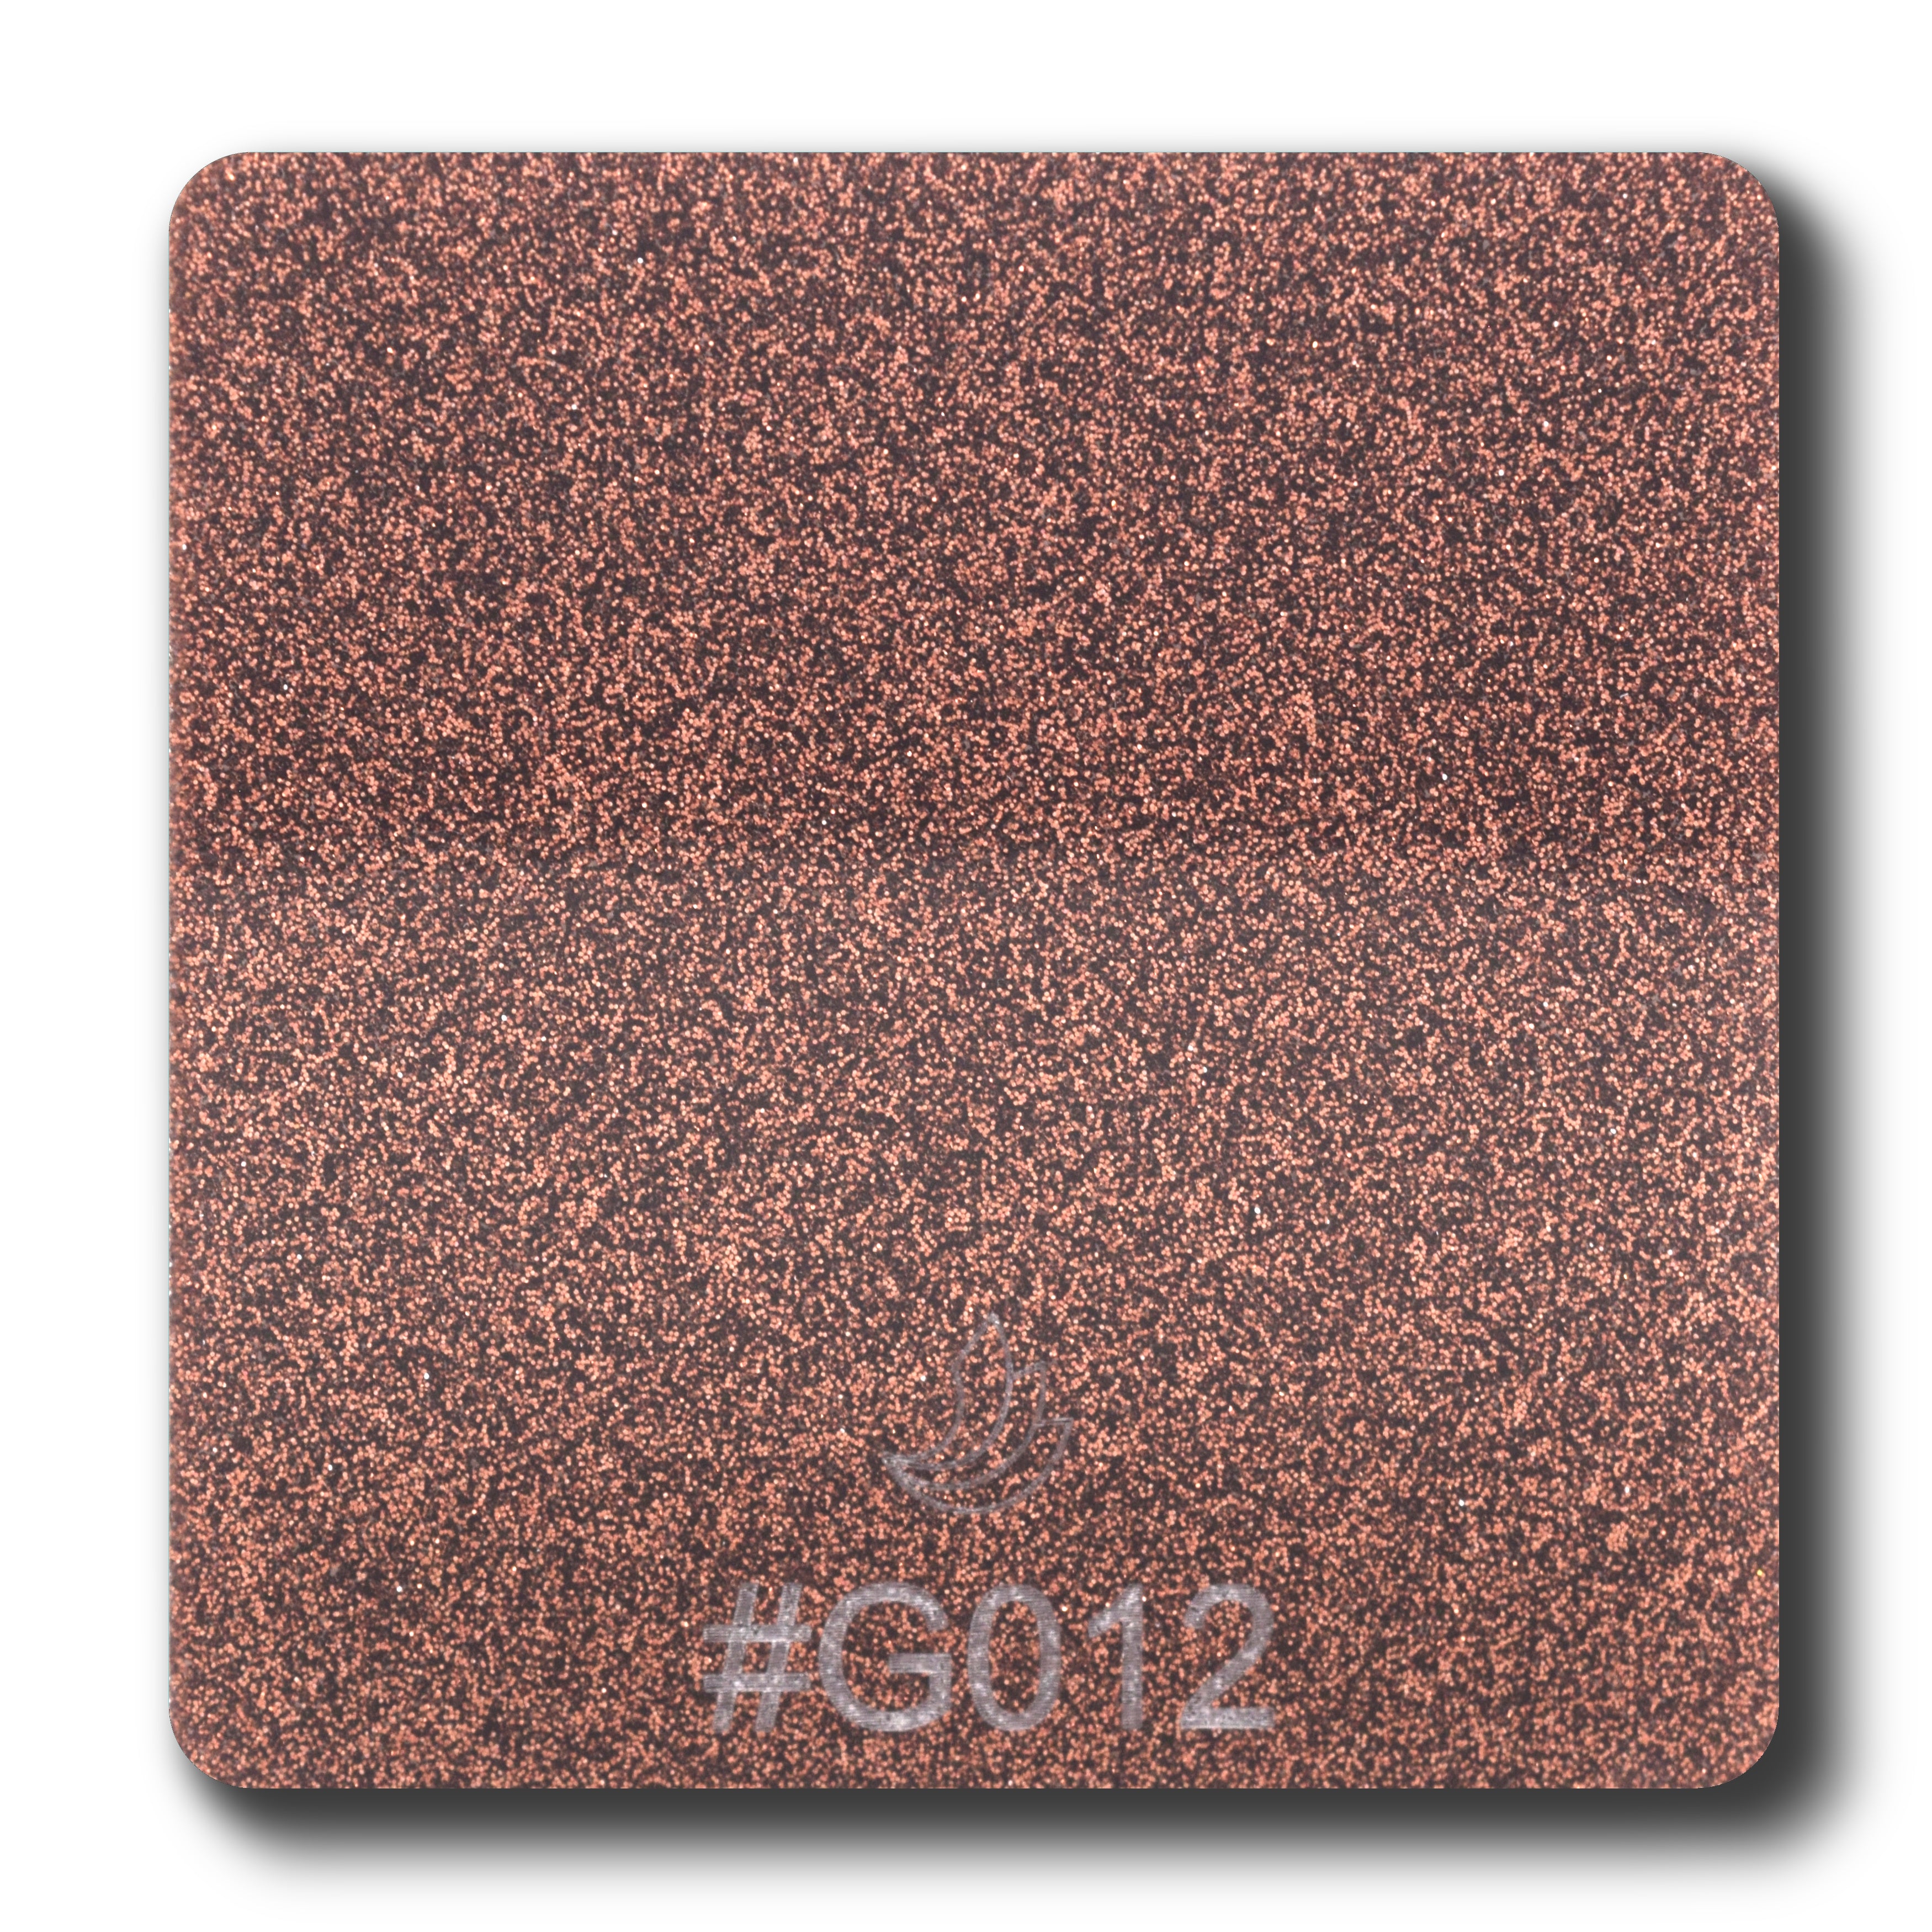 1/8" Brown Glitter Two-Sided Acrylic Sheet